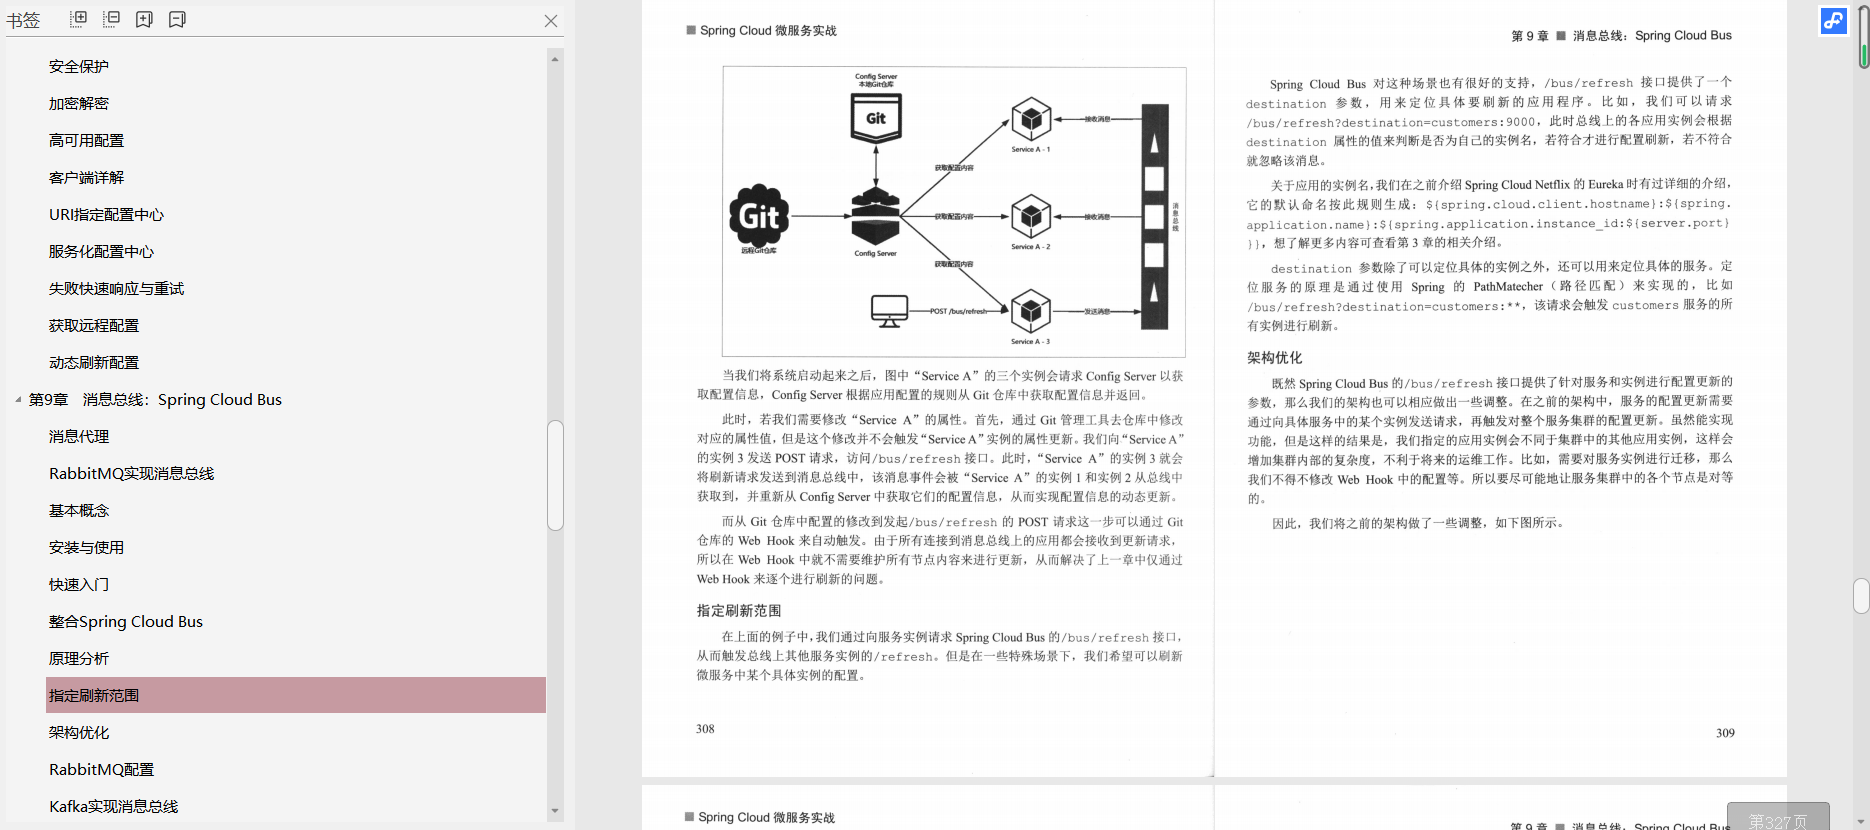 Love, love, Spring Cloud Alibaba internal microservice architecture notes are really amazing